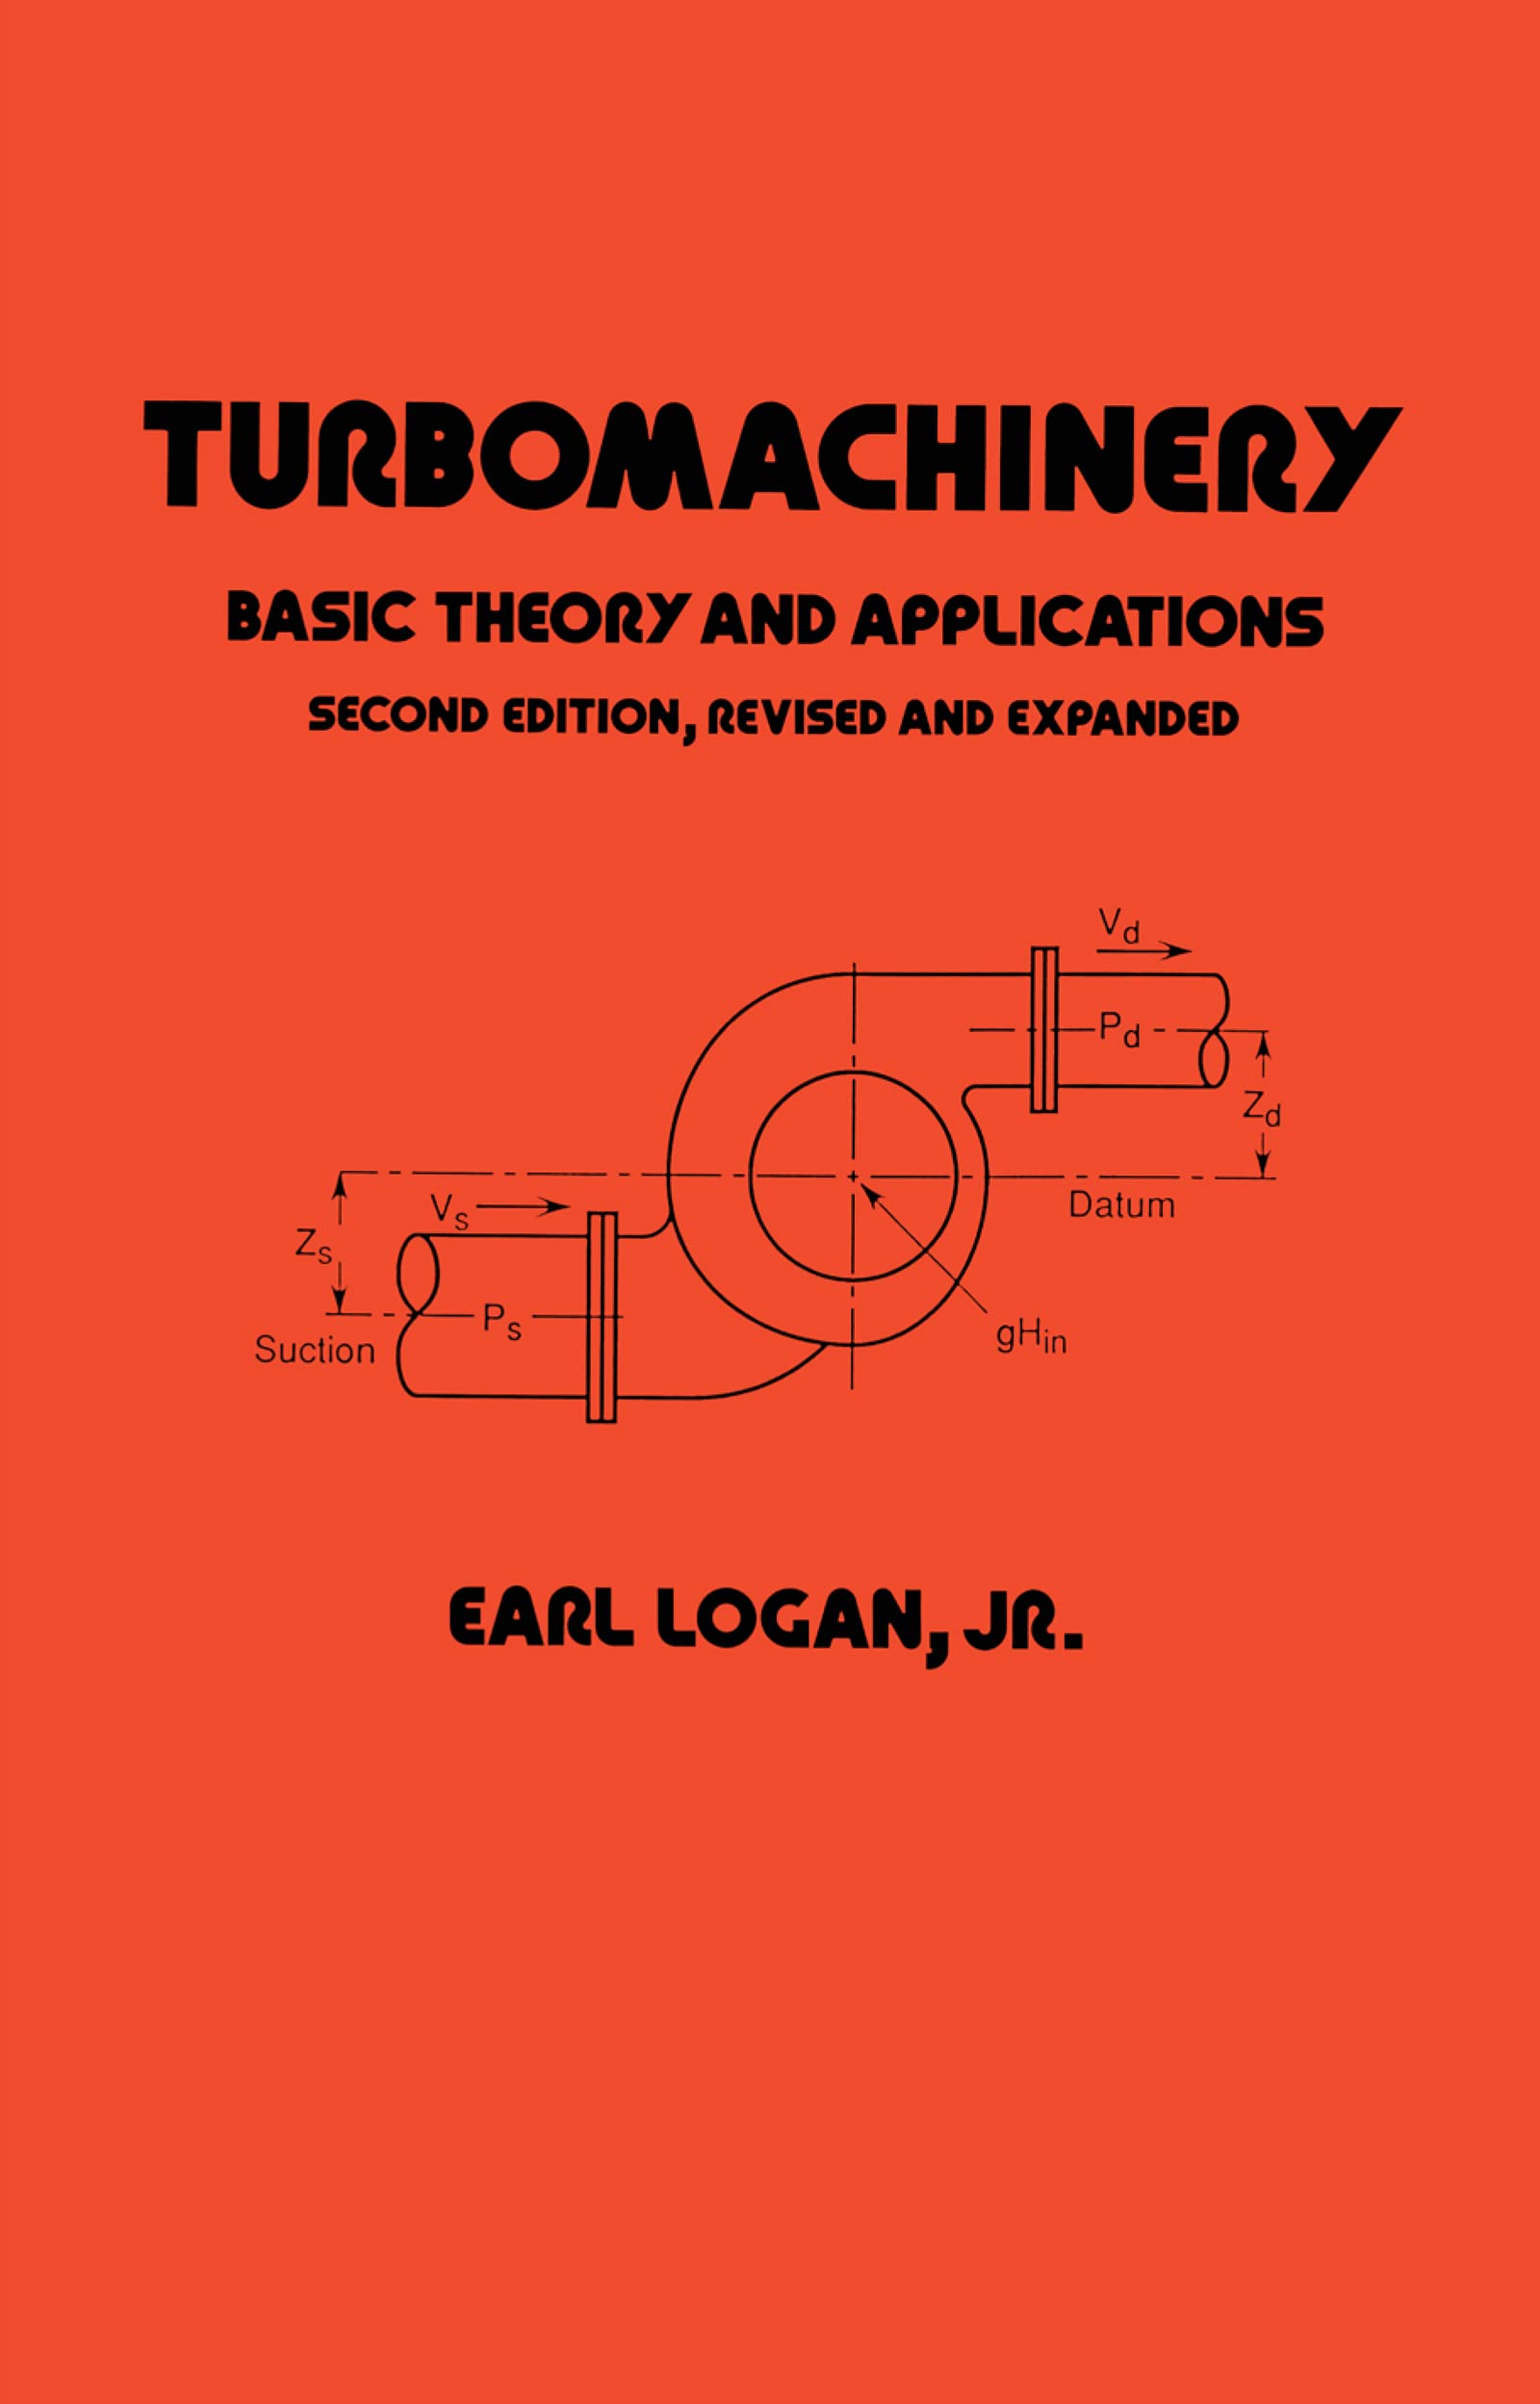 Turbomachinery: Basic Theory and Applications, Second Edition (Mechanical Engineering)